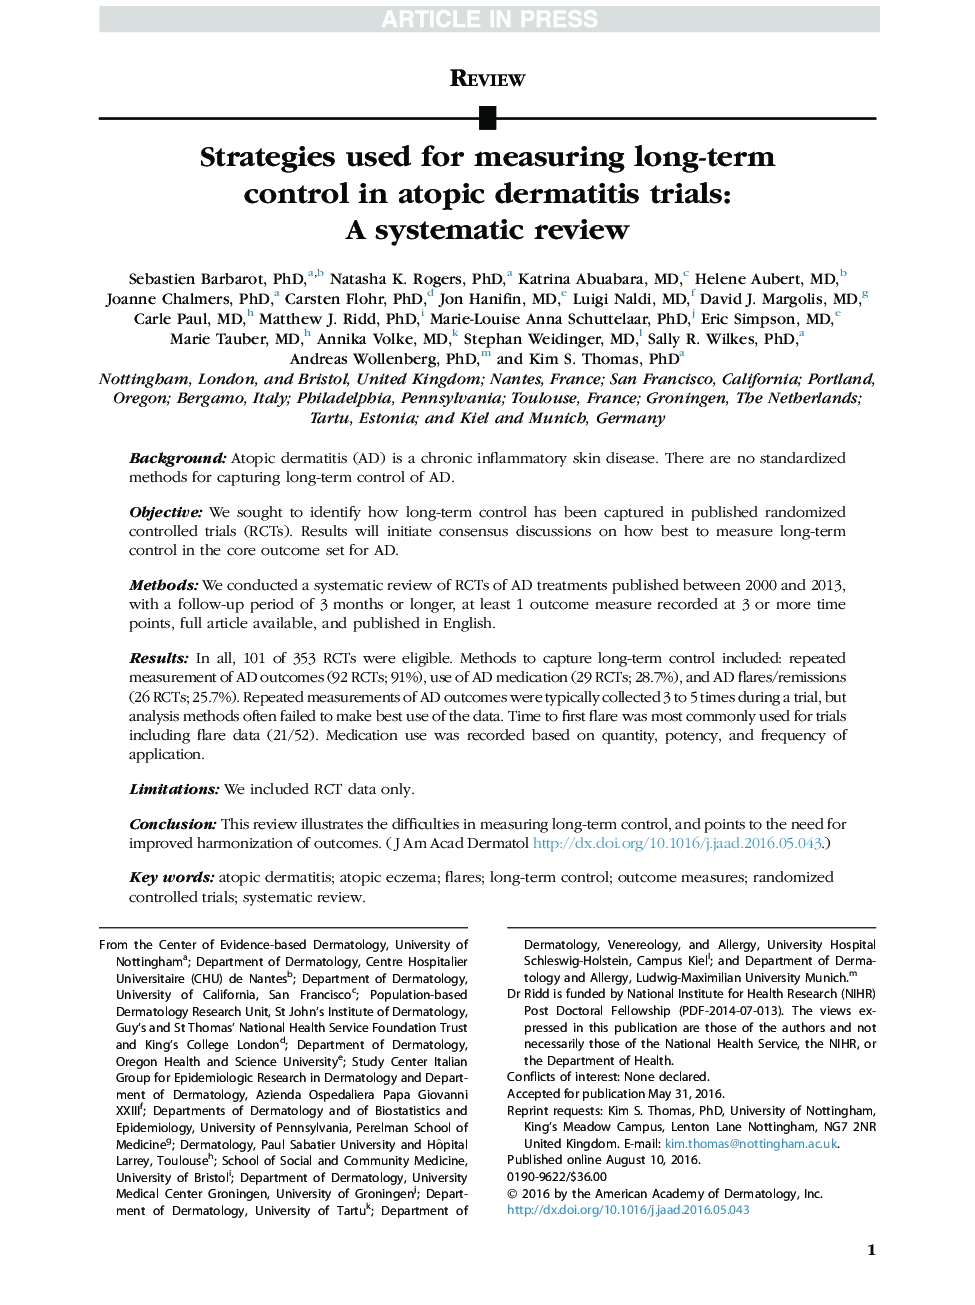 Strategies used for measuring long-term control in atopic dermatitis trials: A systematic review